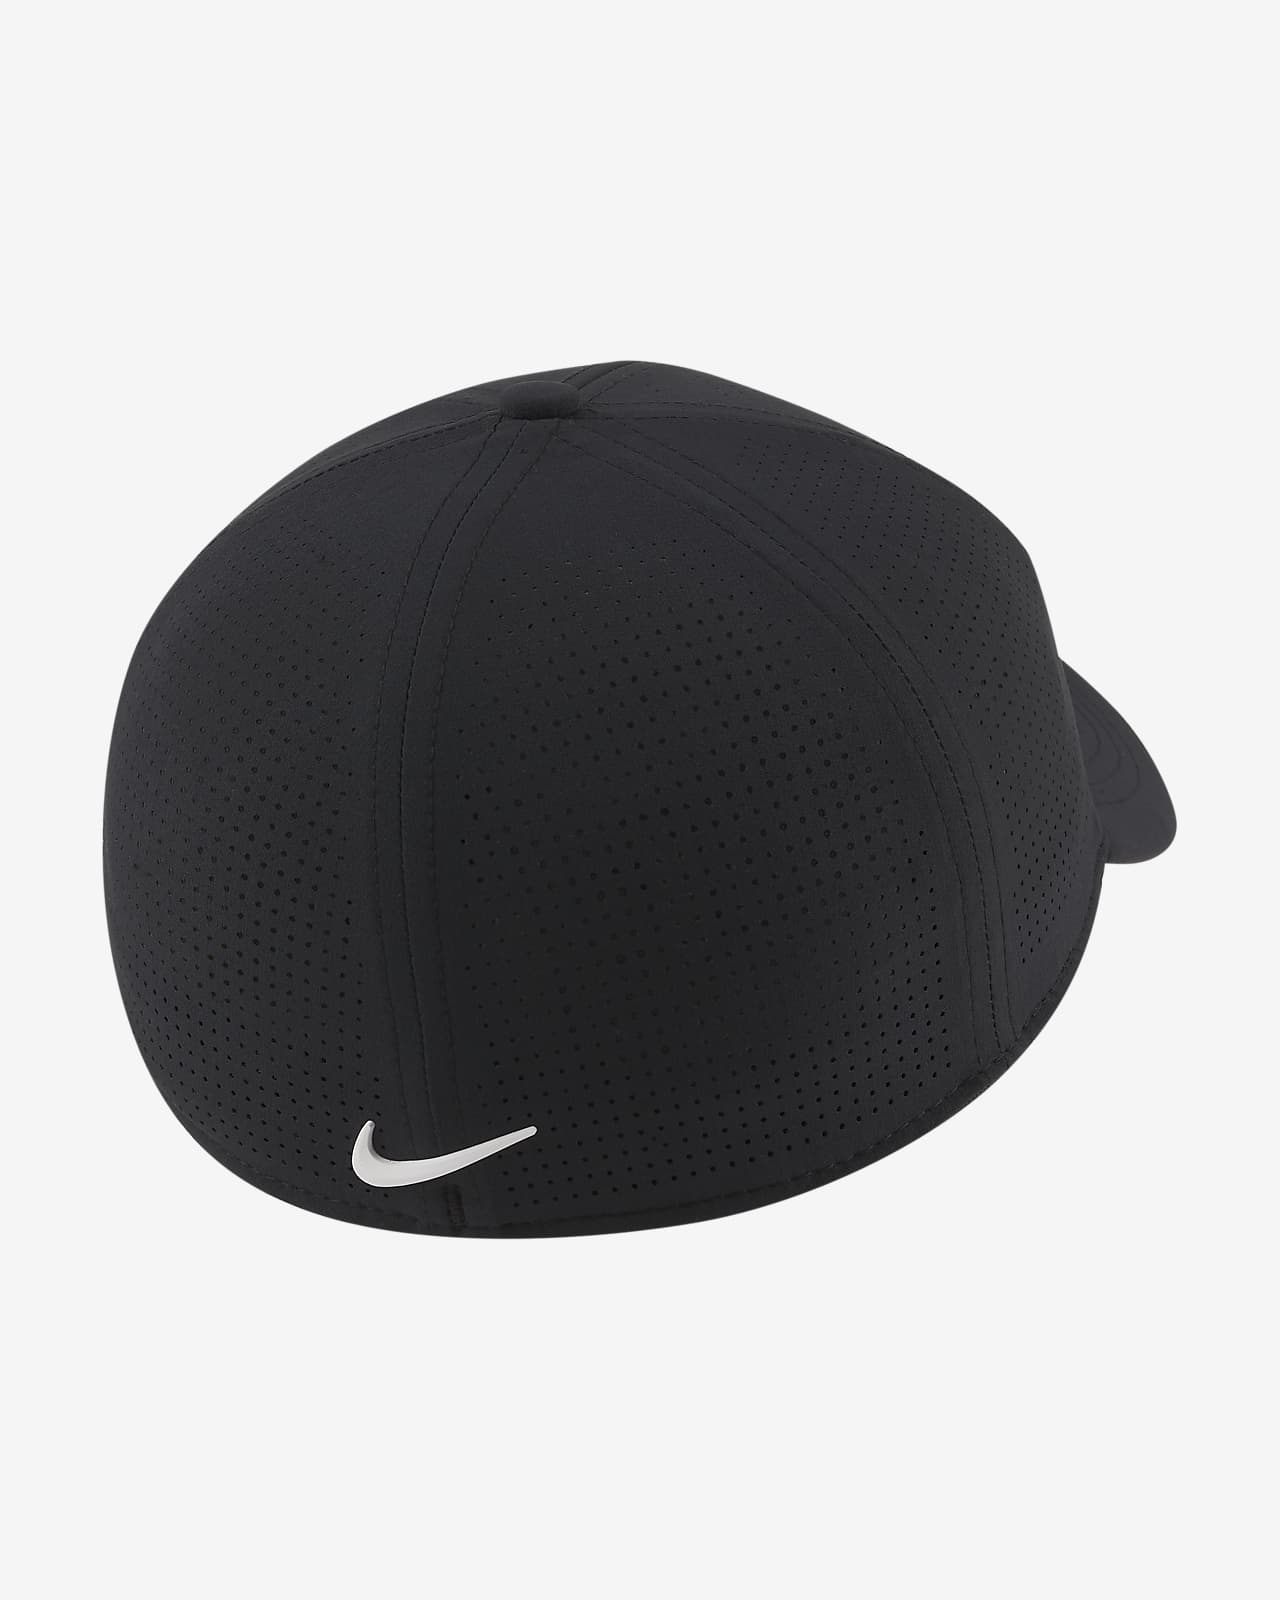 nike perforated golf hat